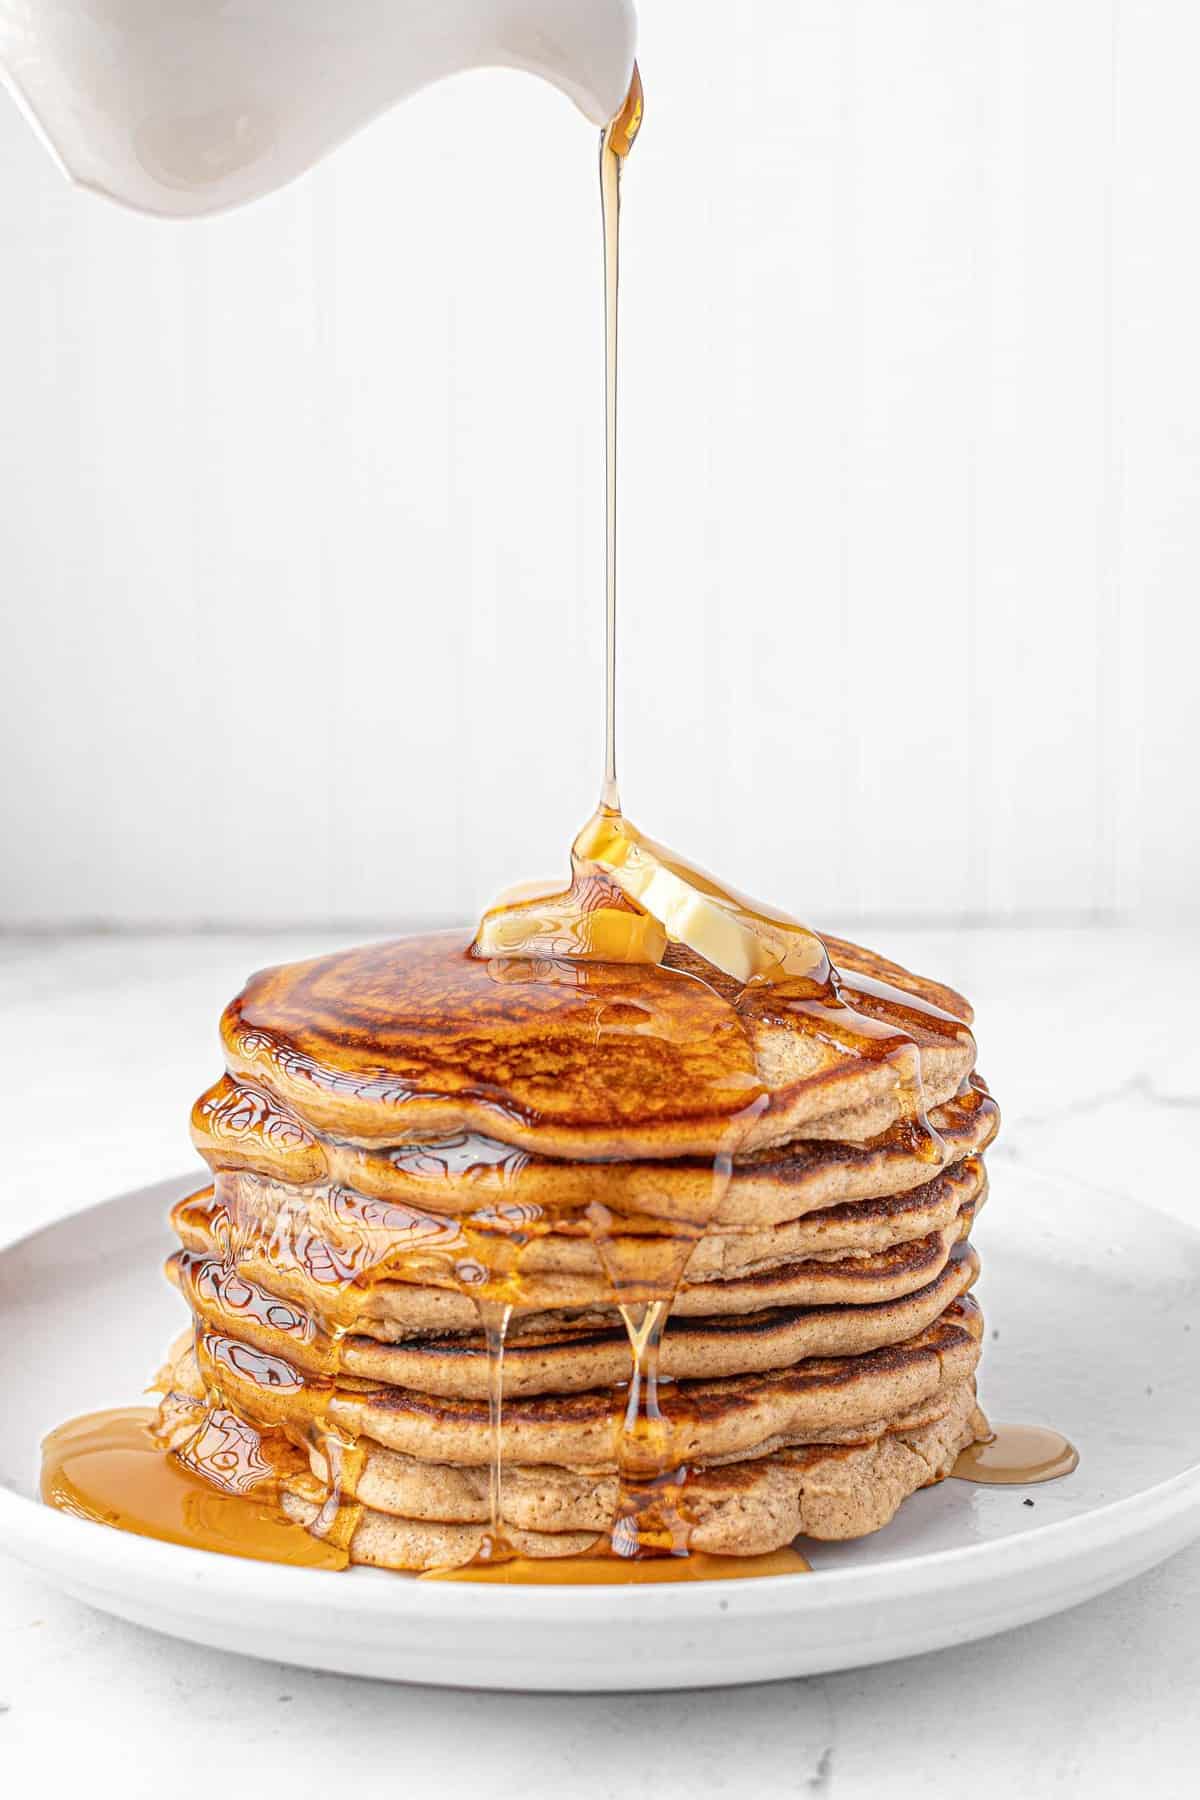 Maple syrup being poured on a large stack of pancakes.